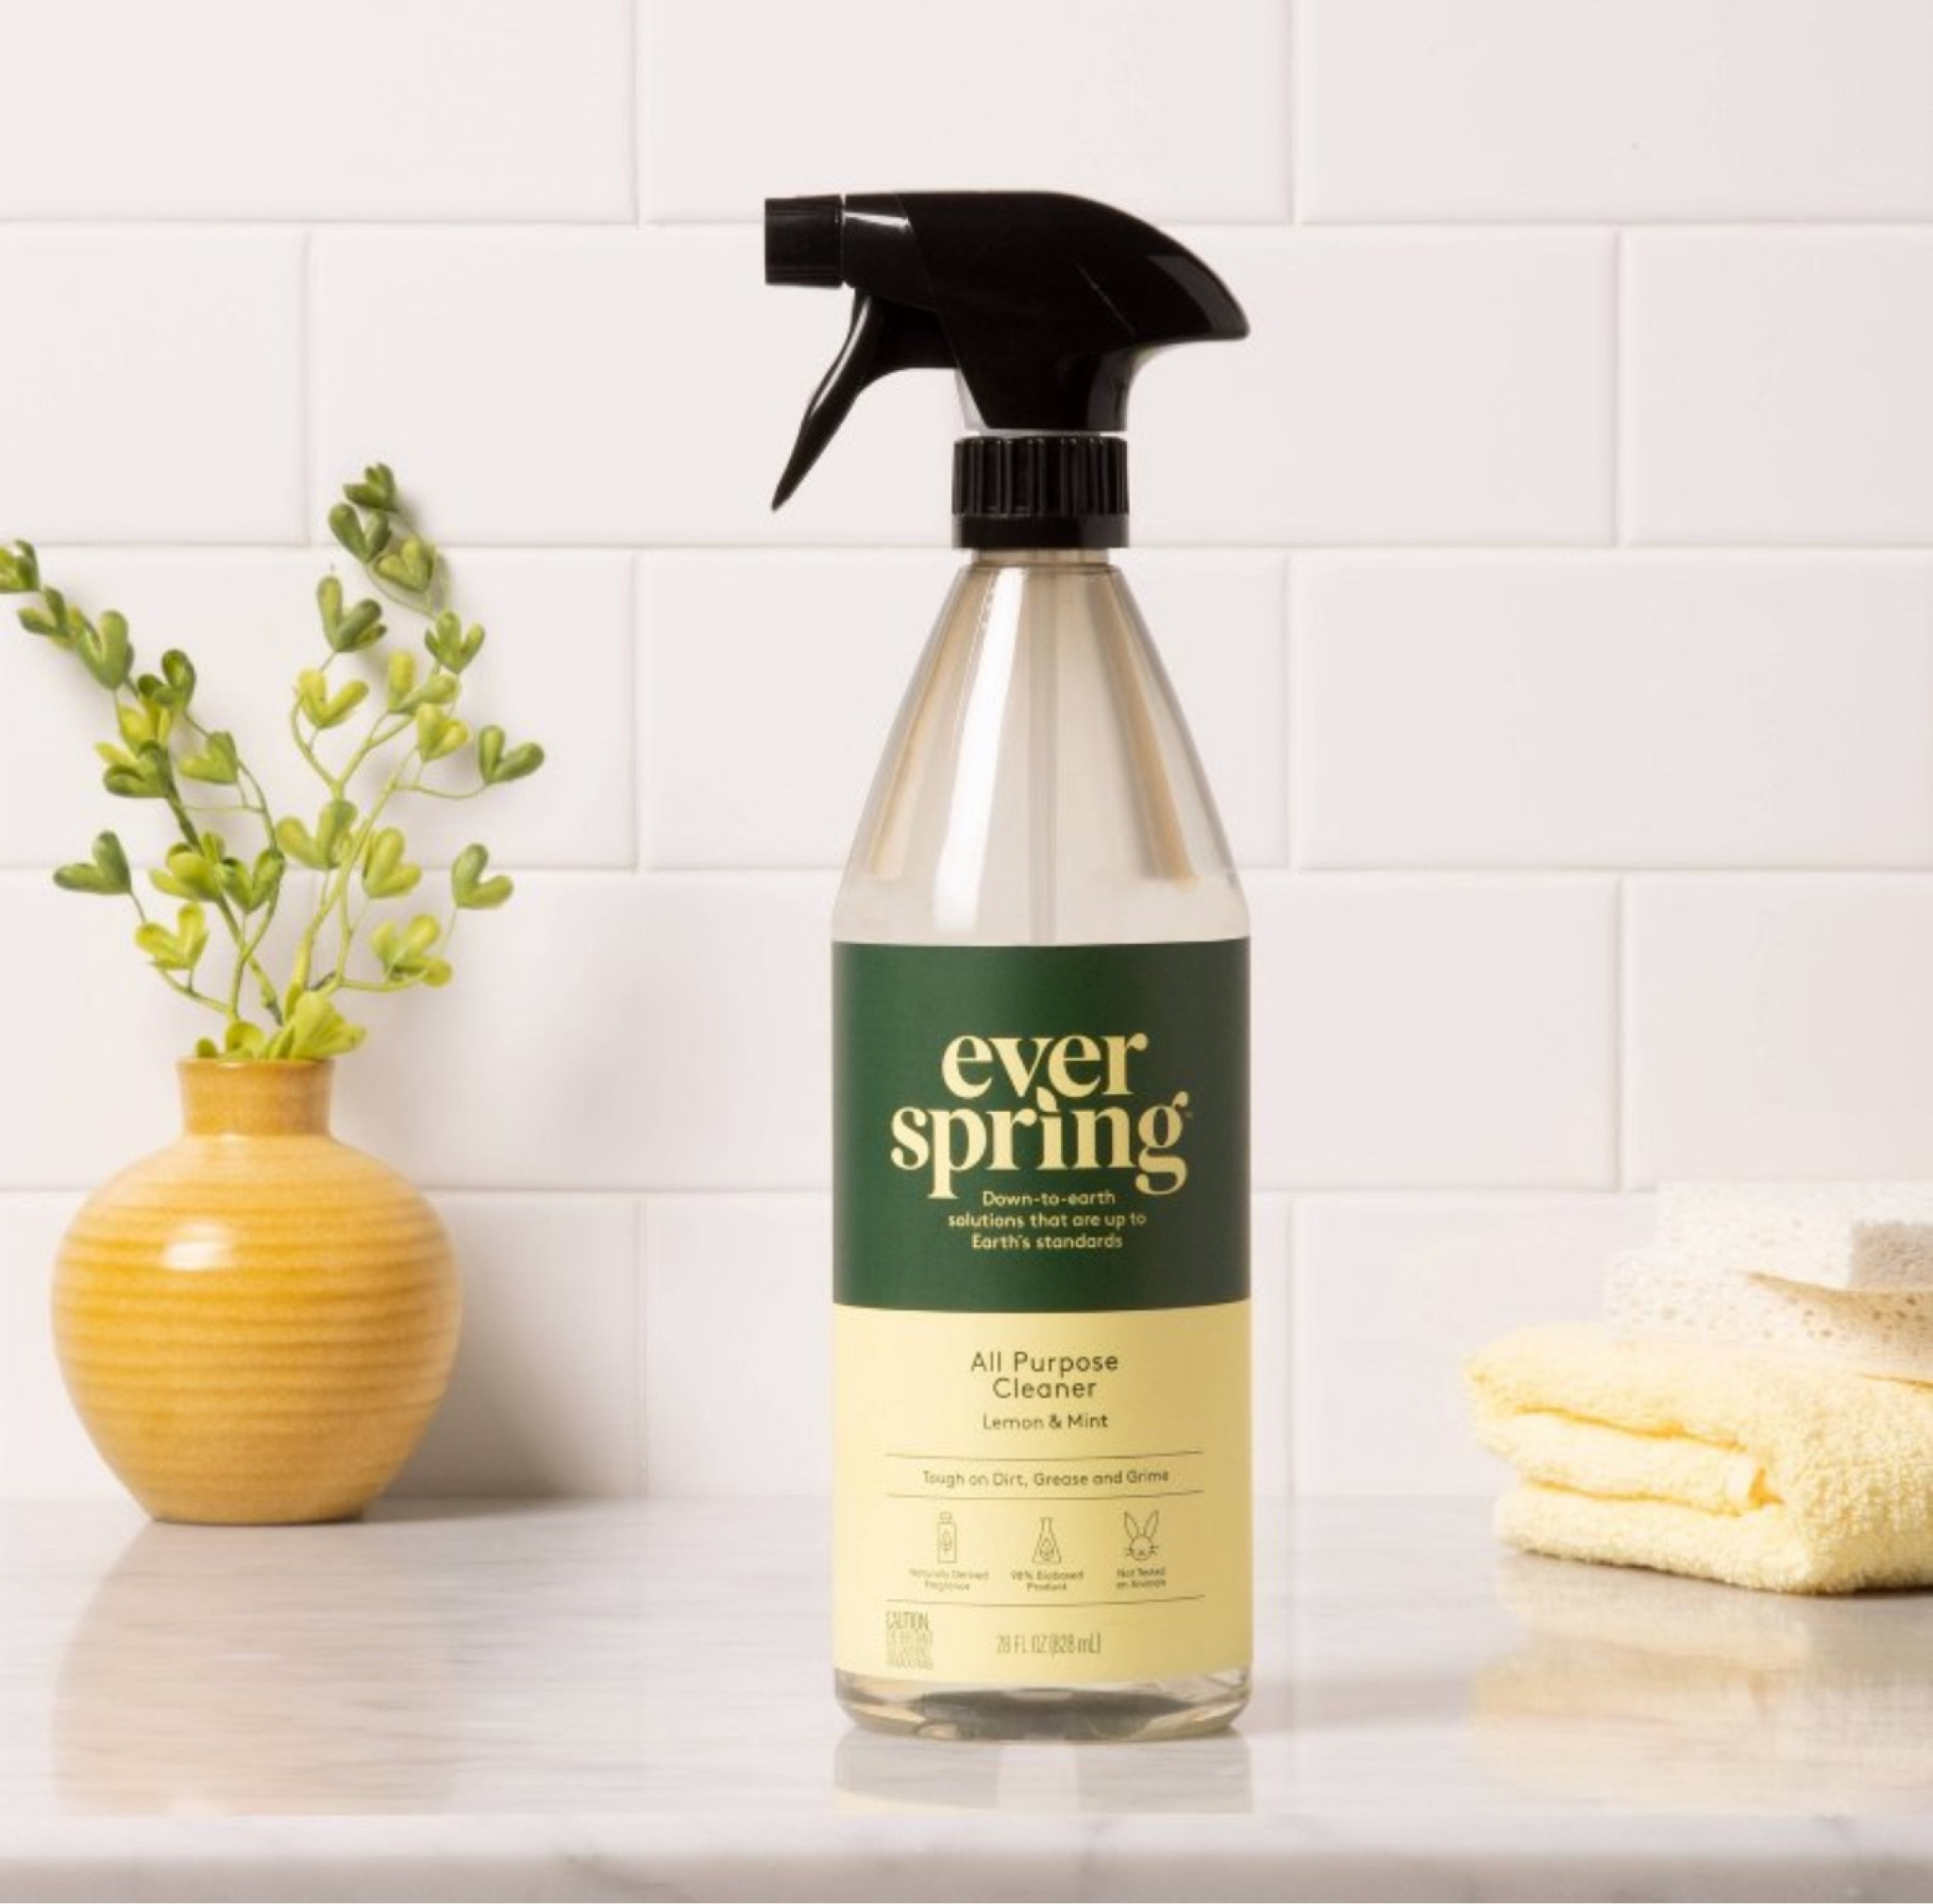 Multi-Use Household Cleaning Soap – Cosy Cottage Soap